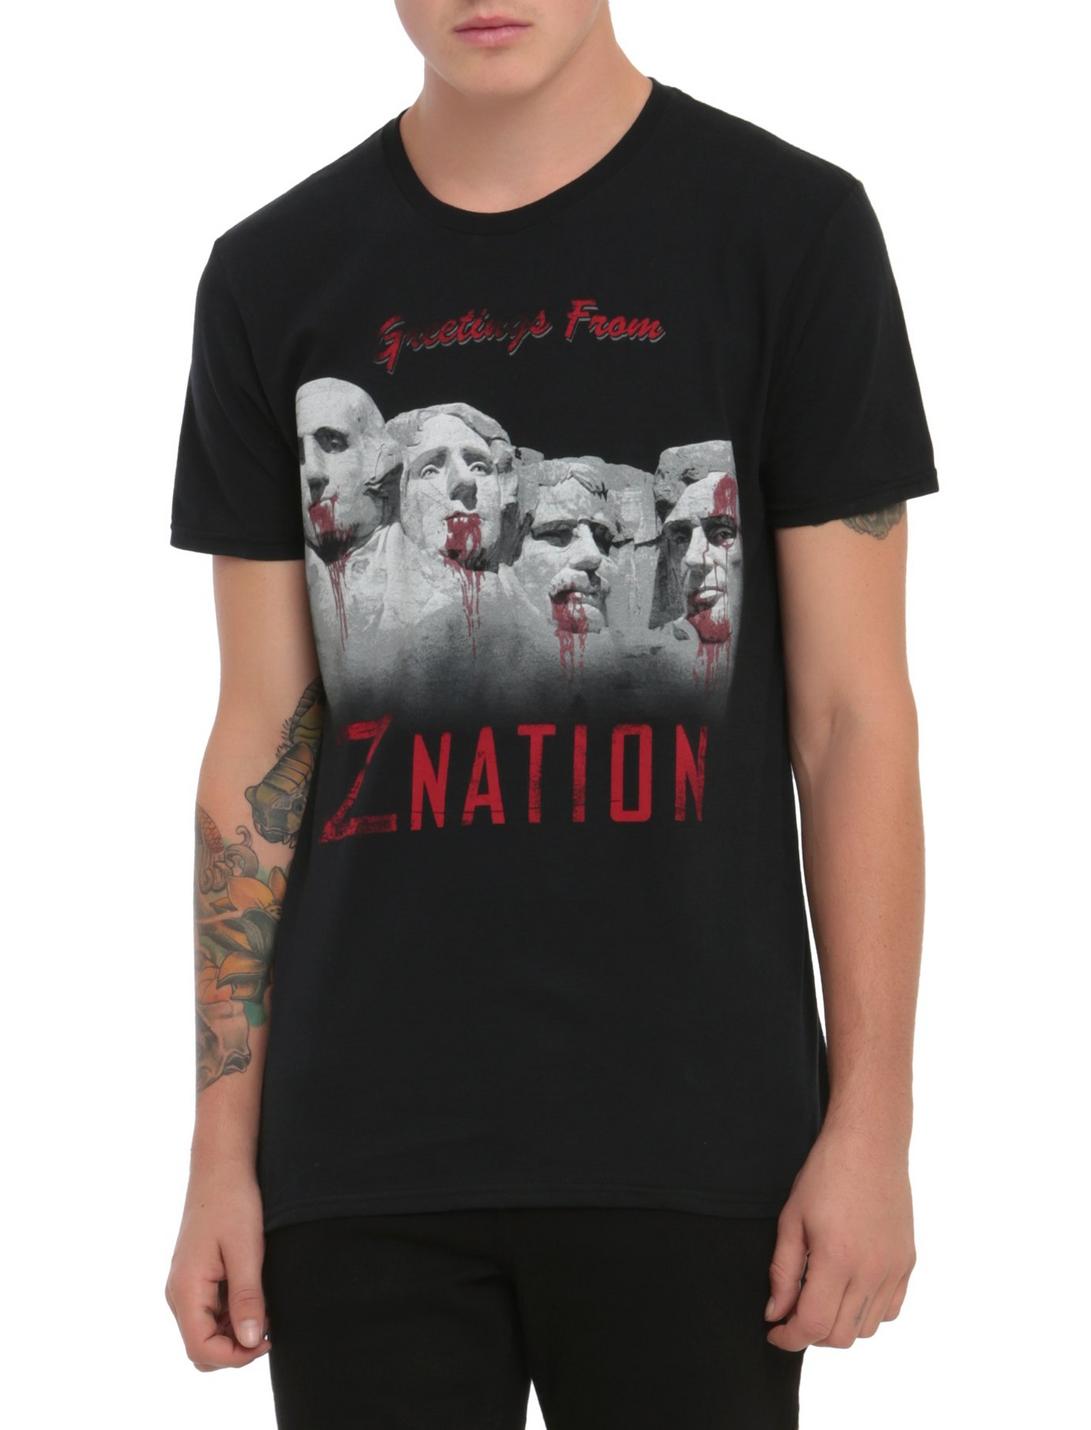 Z Nation Greetings From T-Shirt, BLACK, hi-res